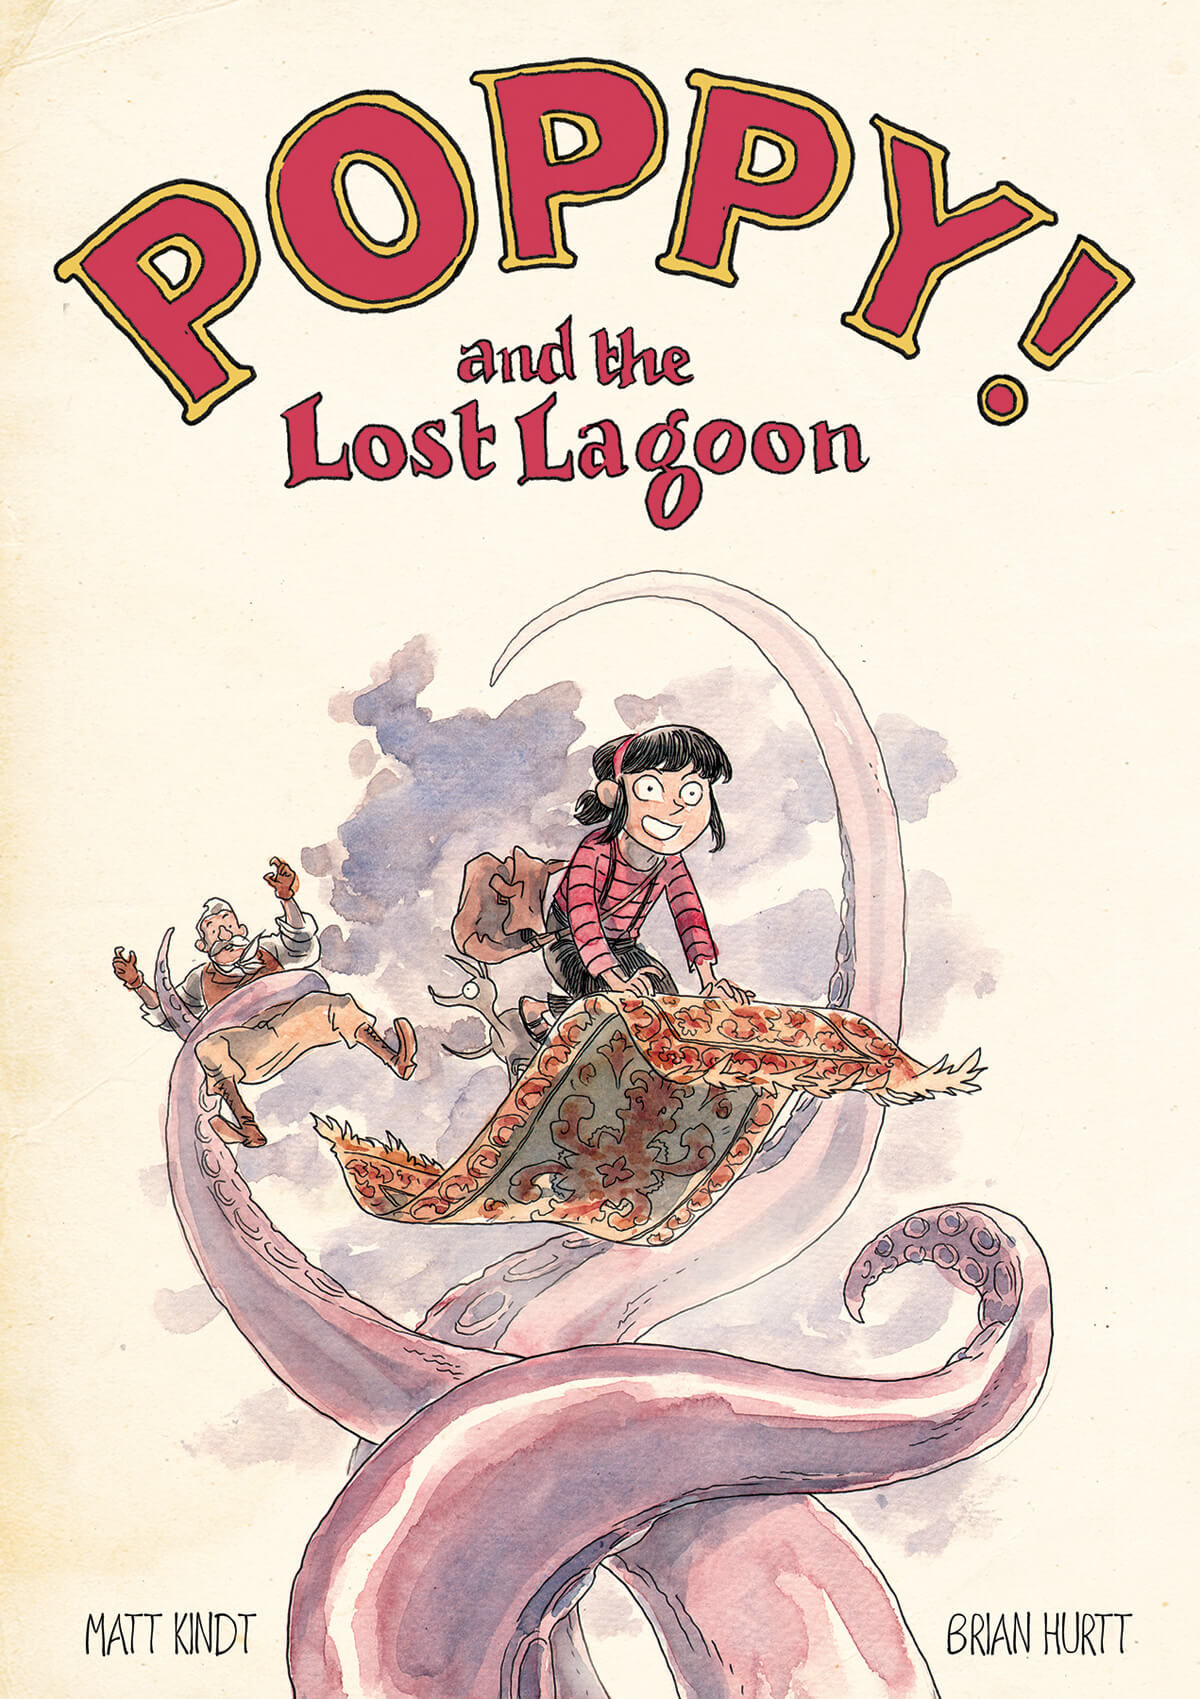 Poppy and the Lost Lagoon by Matt Kindt and Brian Hurtt